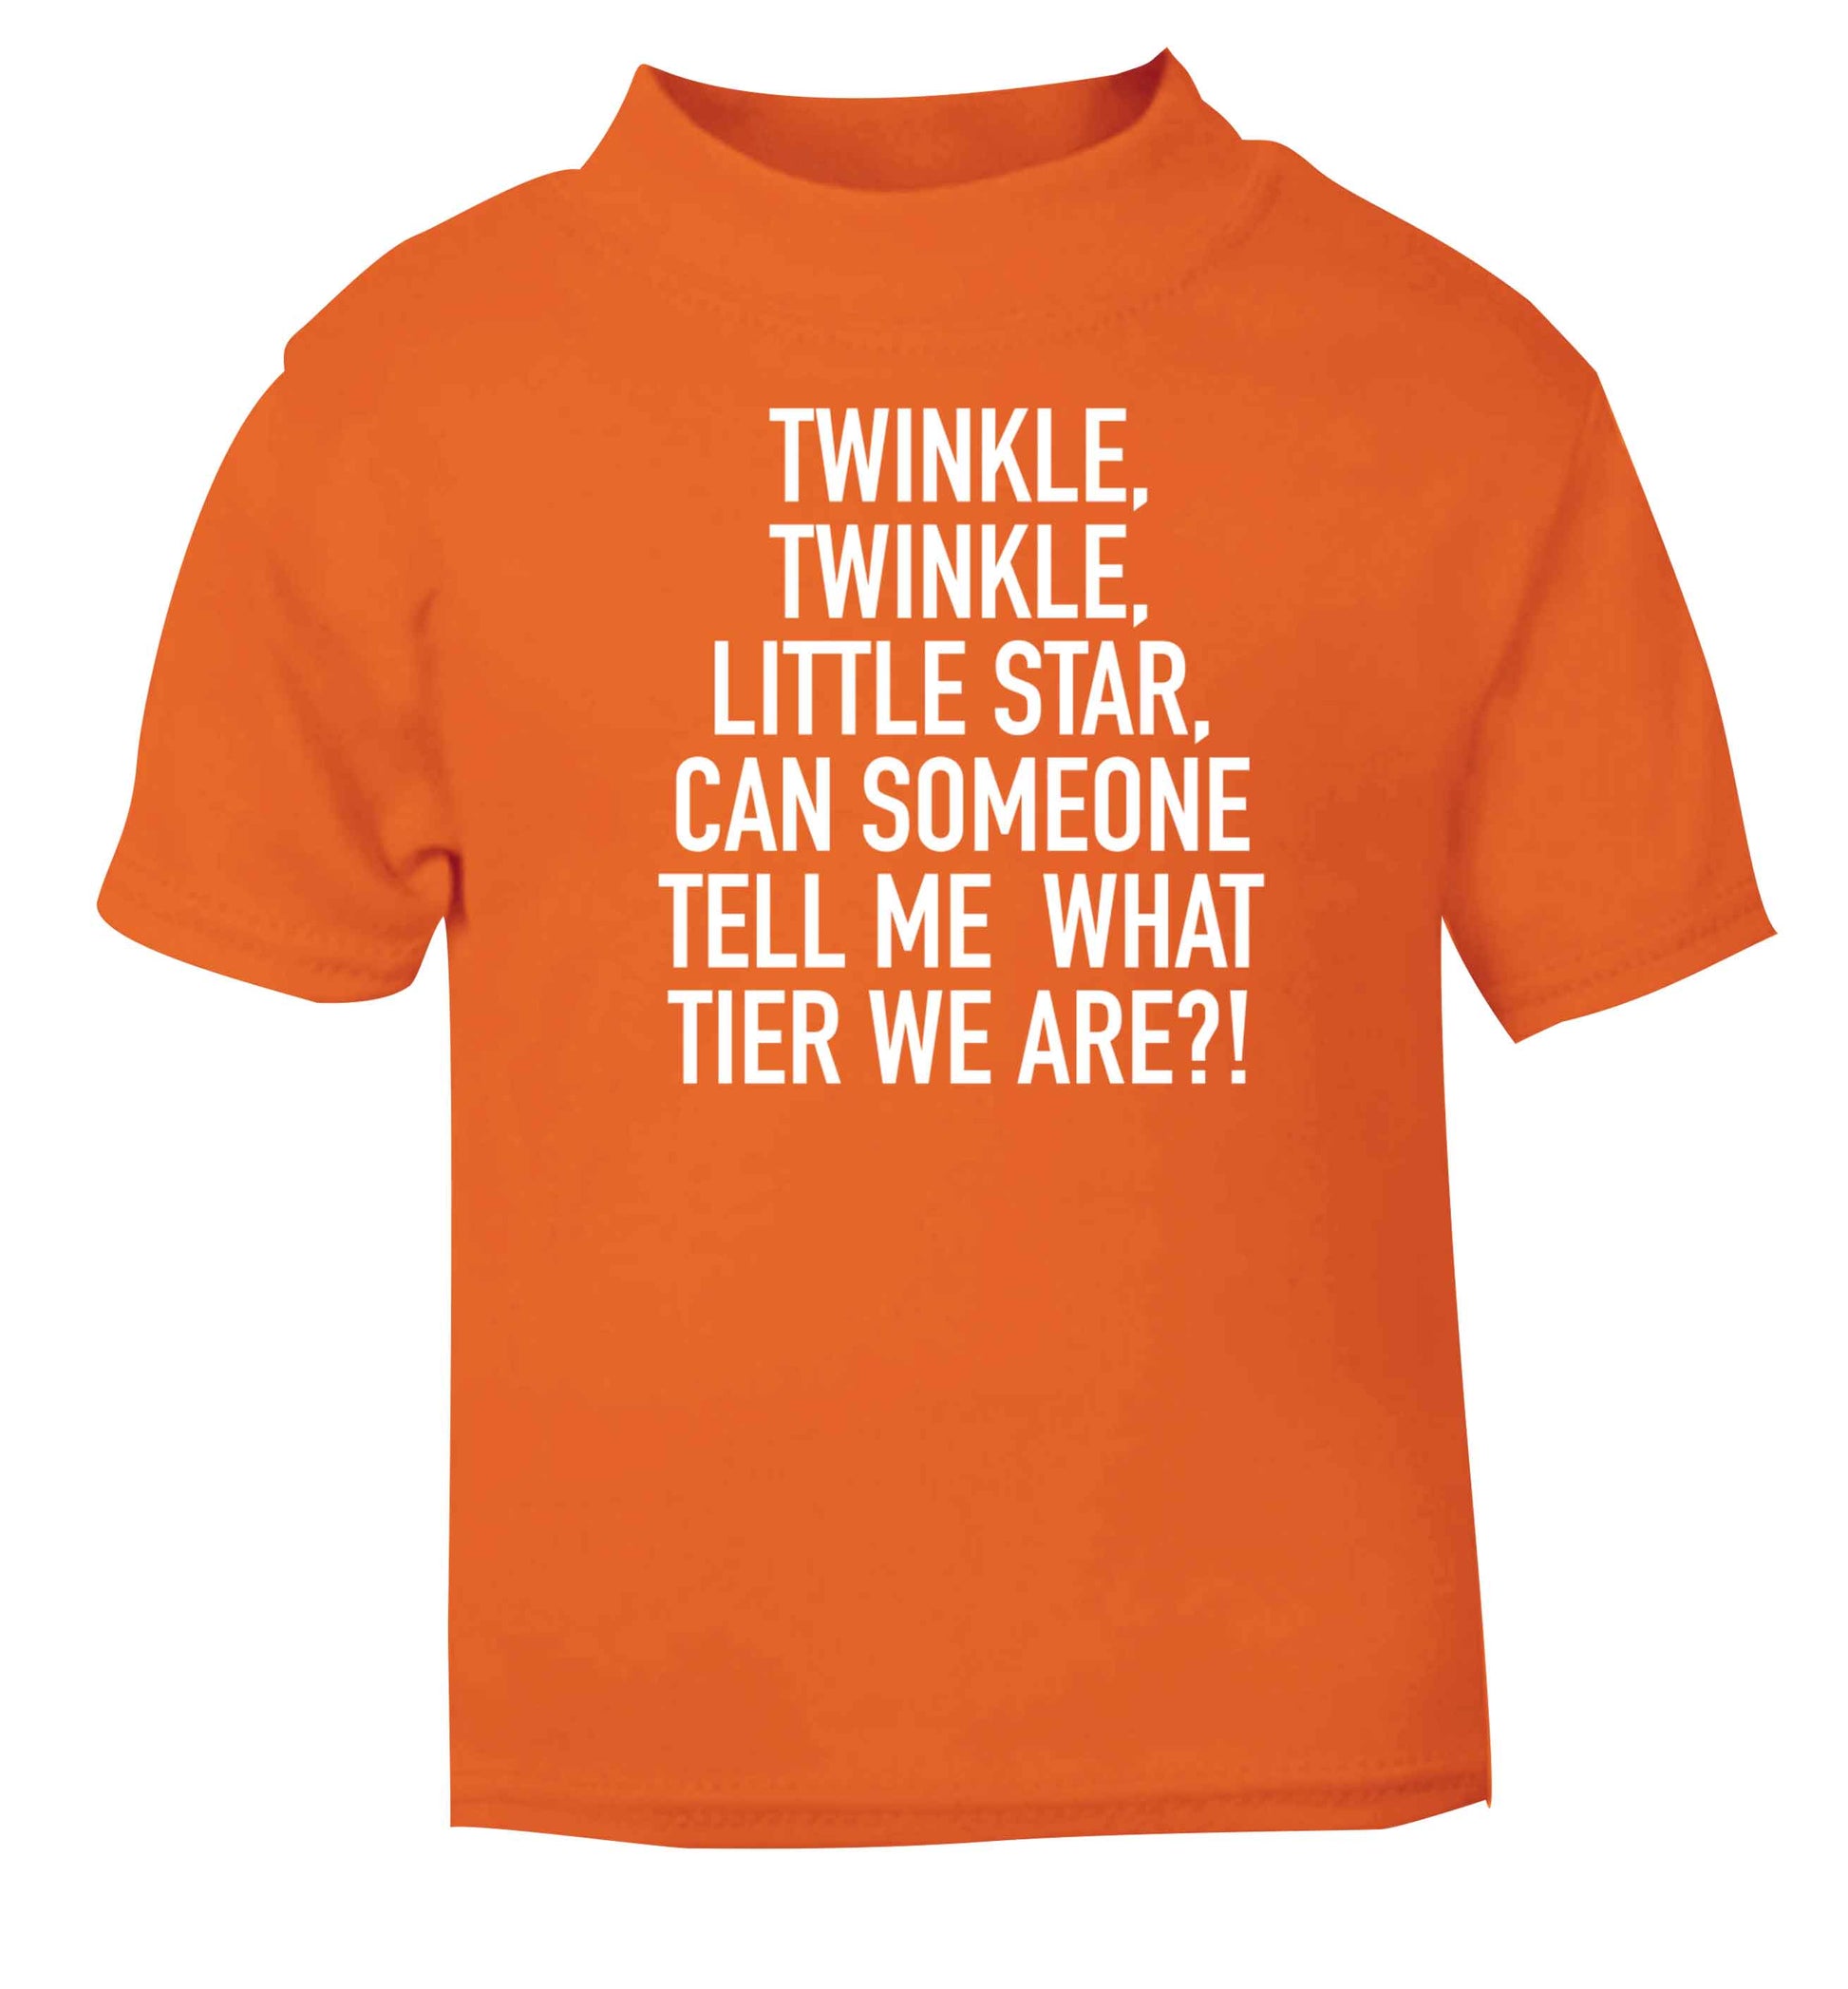 Twinkle twinkle, little star does anyone know what tier we are? orange baby toddler Tshirt 2 Years